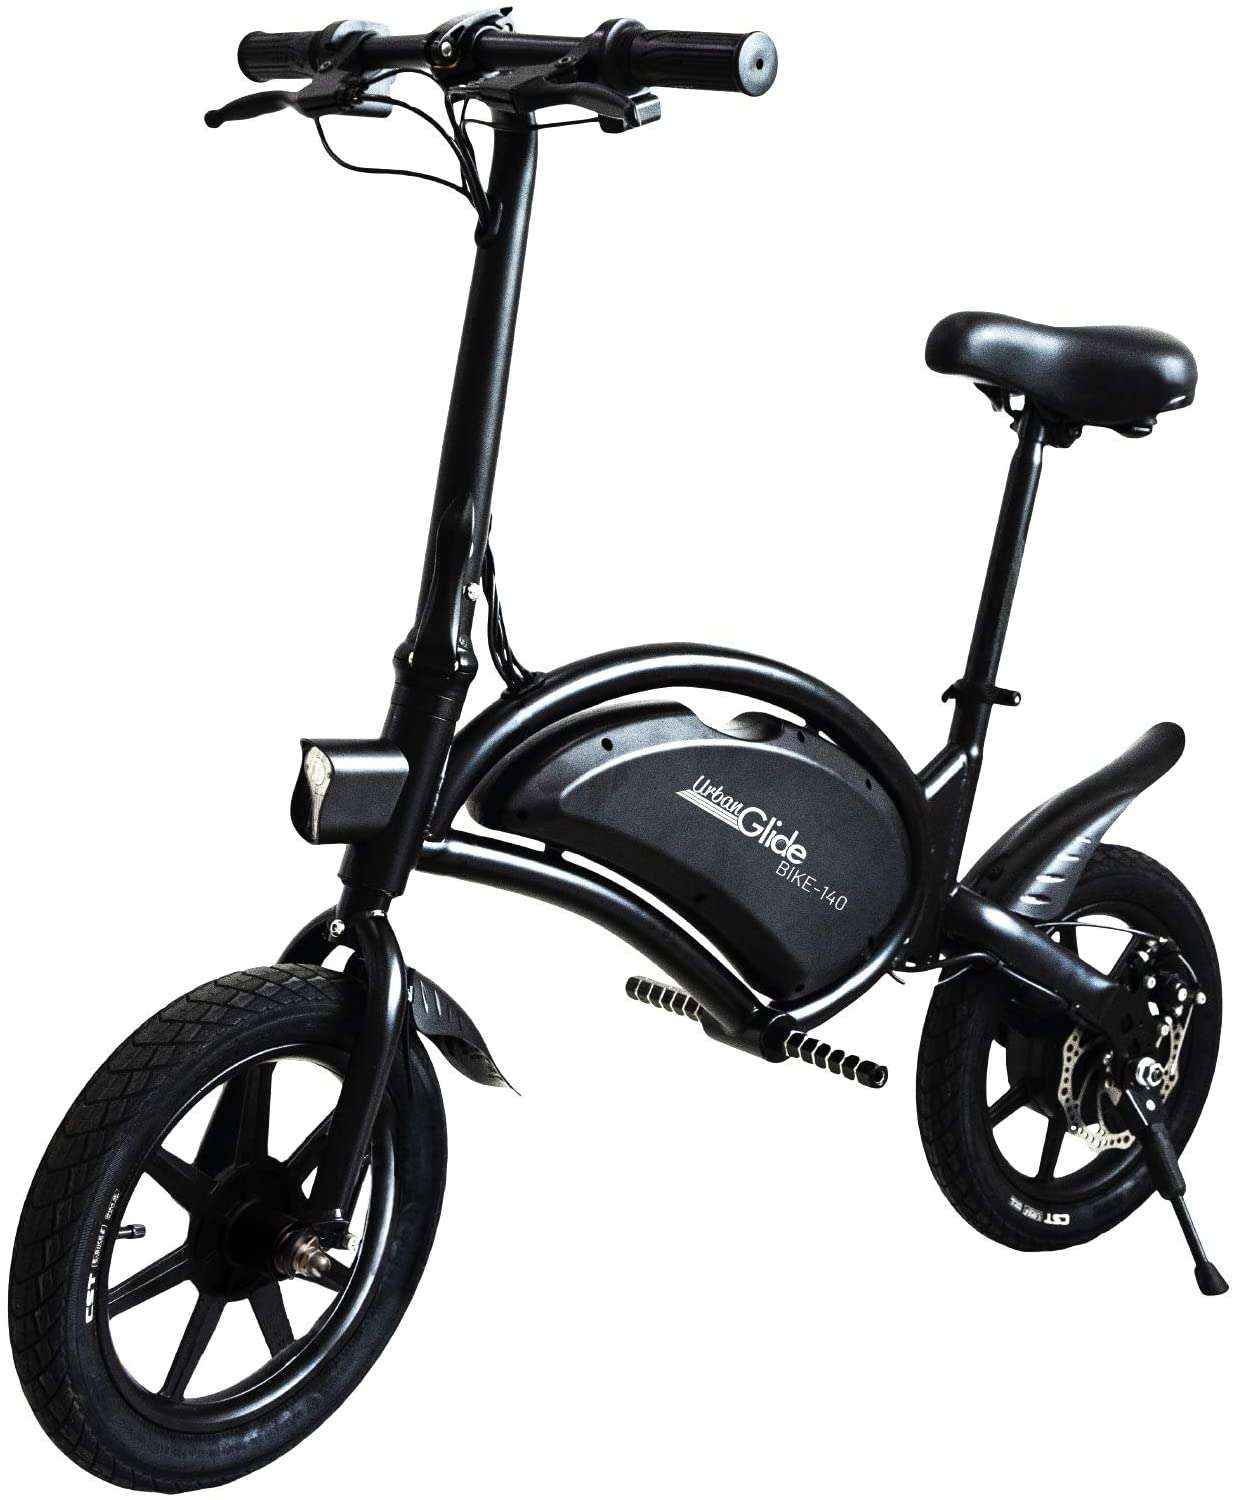 Good Amazon deal: the UrbanGlide electric balance bike at a great price! thumbnail